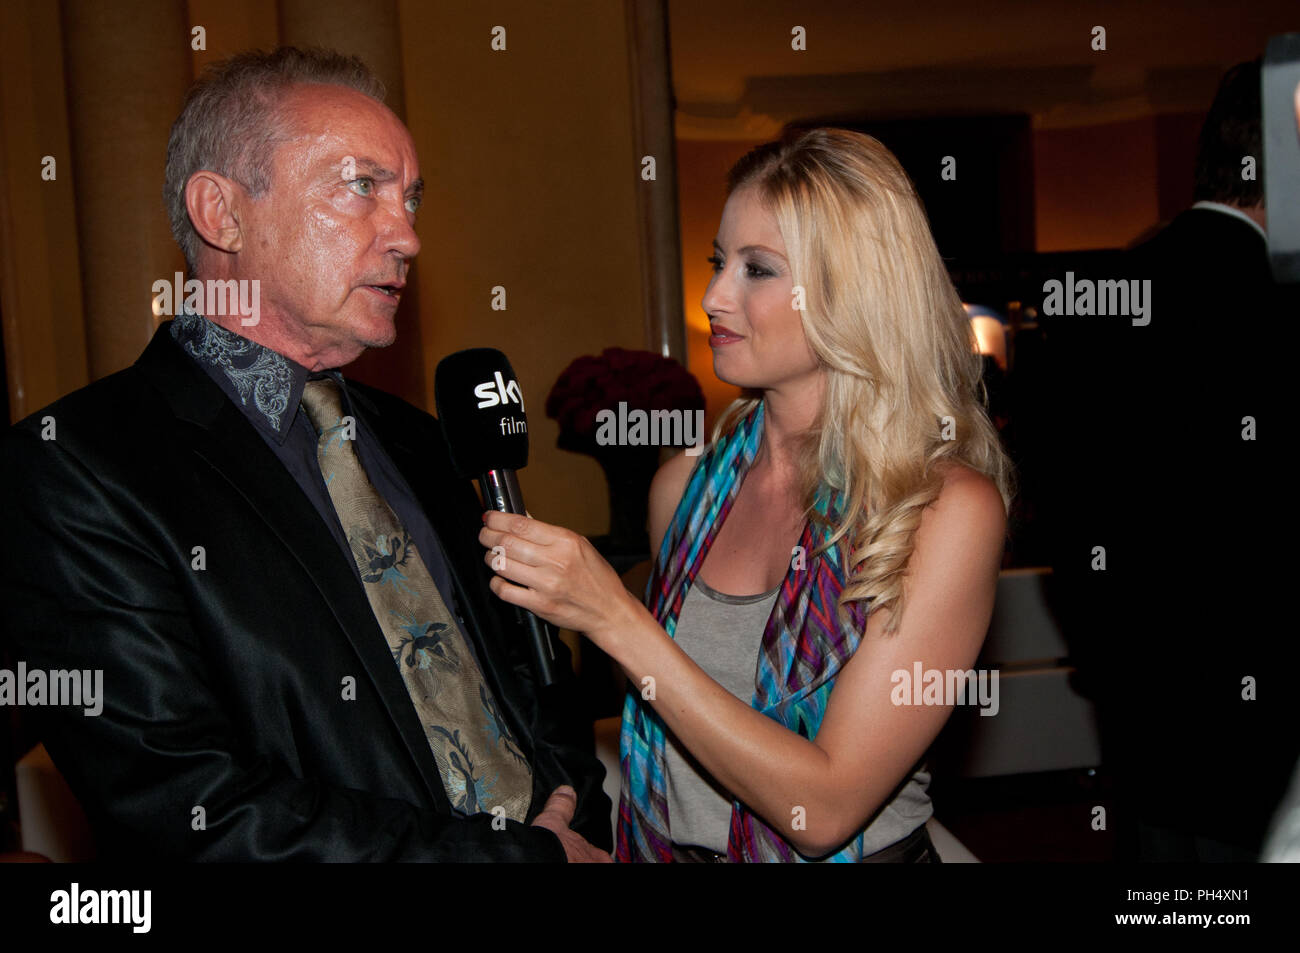 Actor Udo Kier gives an interview at the opening of Filmfest München 2012 Stock Photo